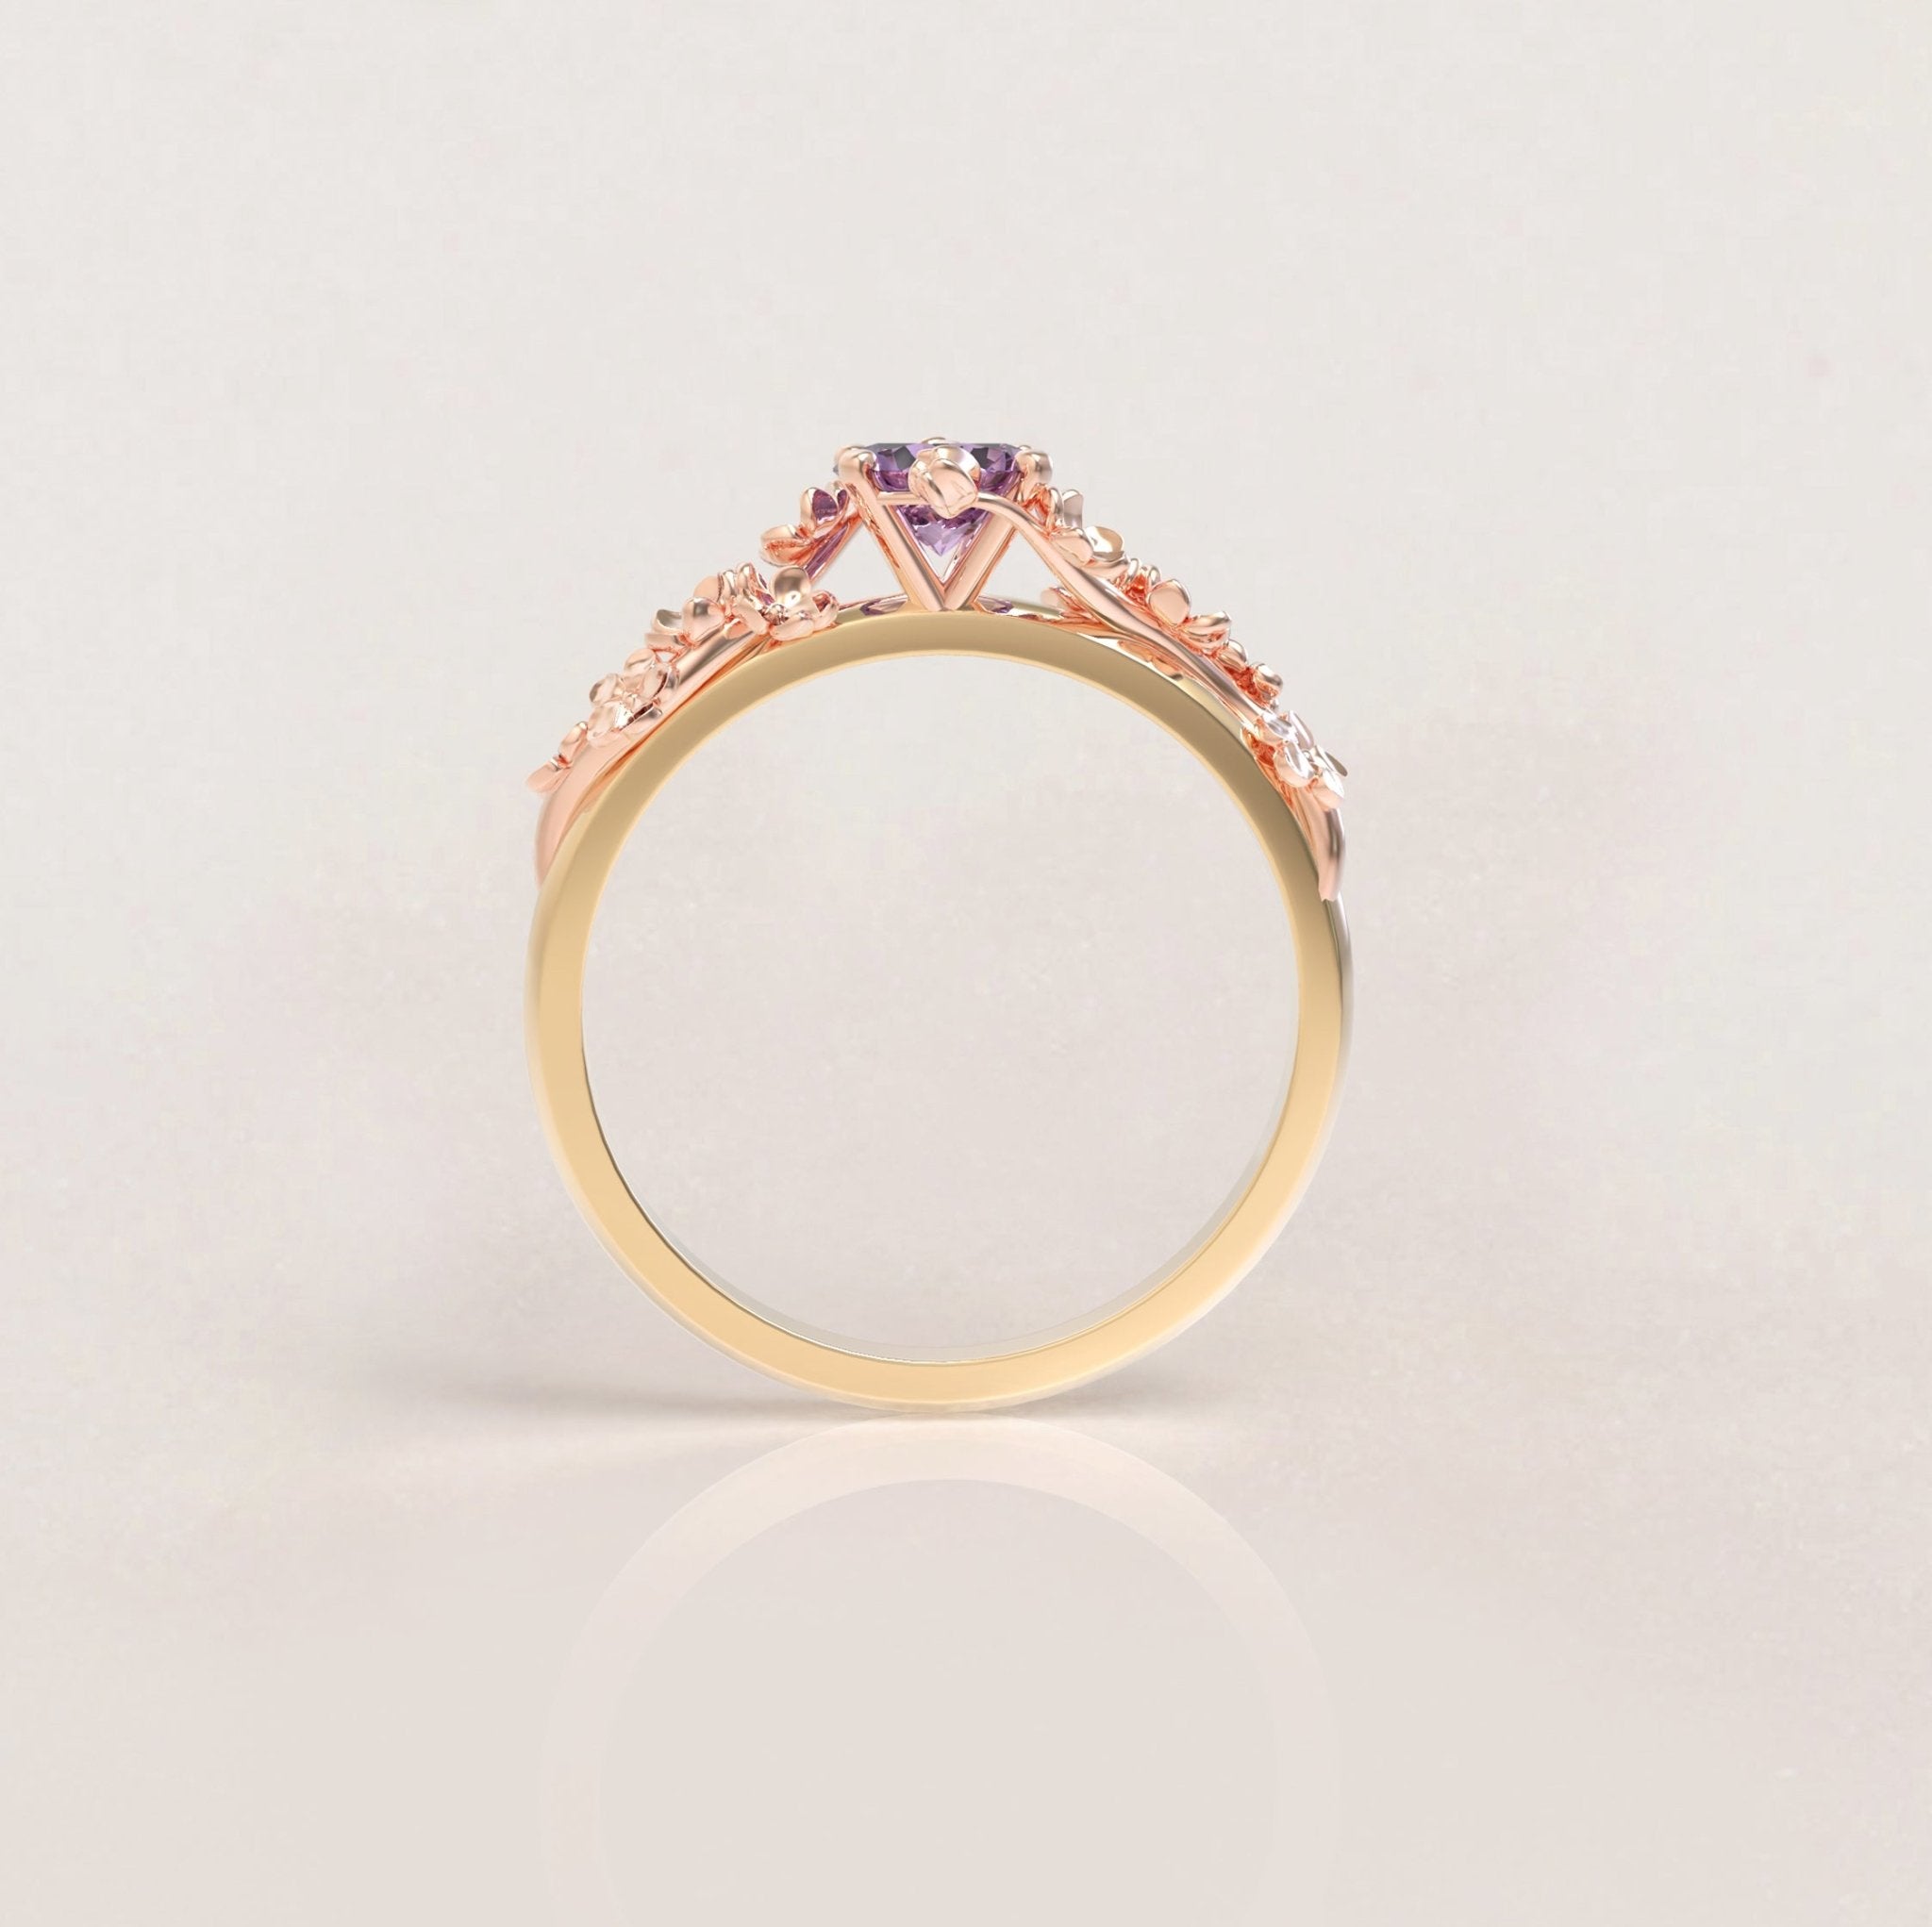 Unique Flowers Engagement Ring No.6 Version 2 in Yellow Band/Rose Flowers Gold - Amethyst - Roelavi